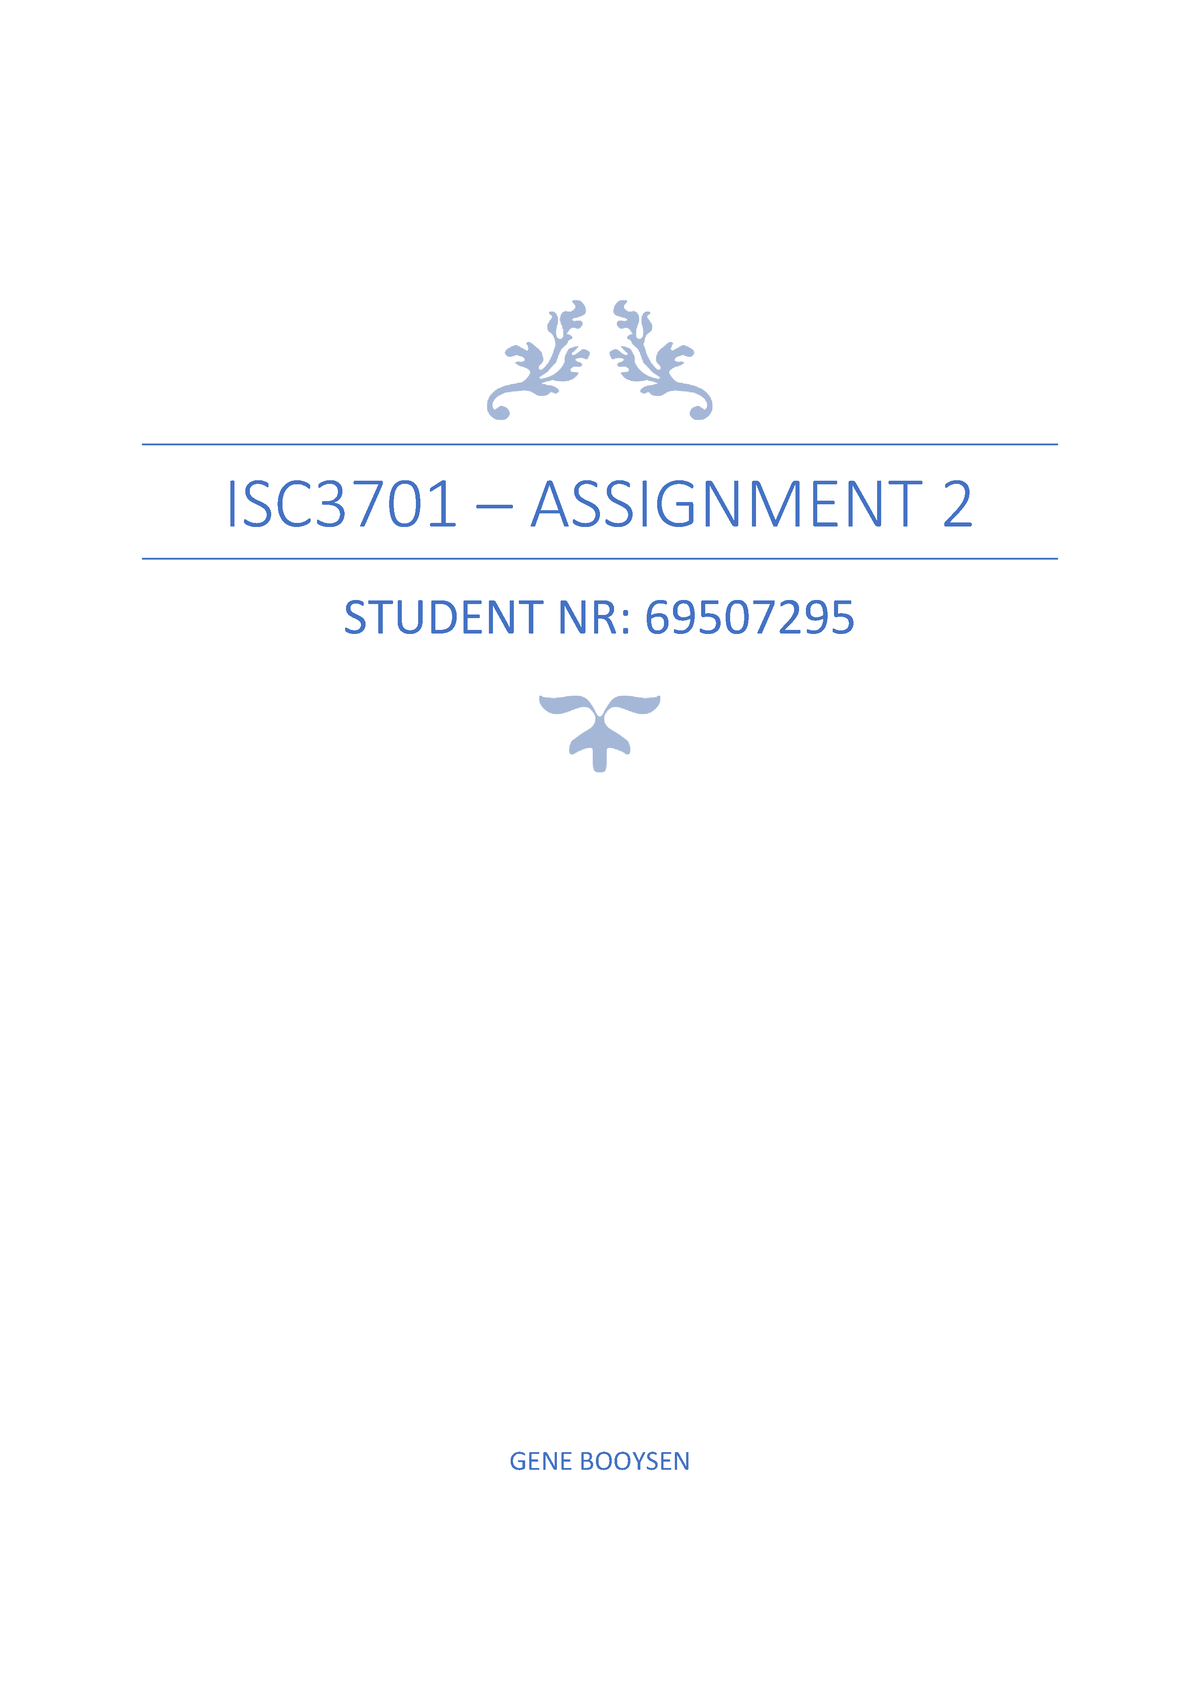 reflection on isc3701 assignment 2